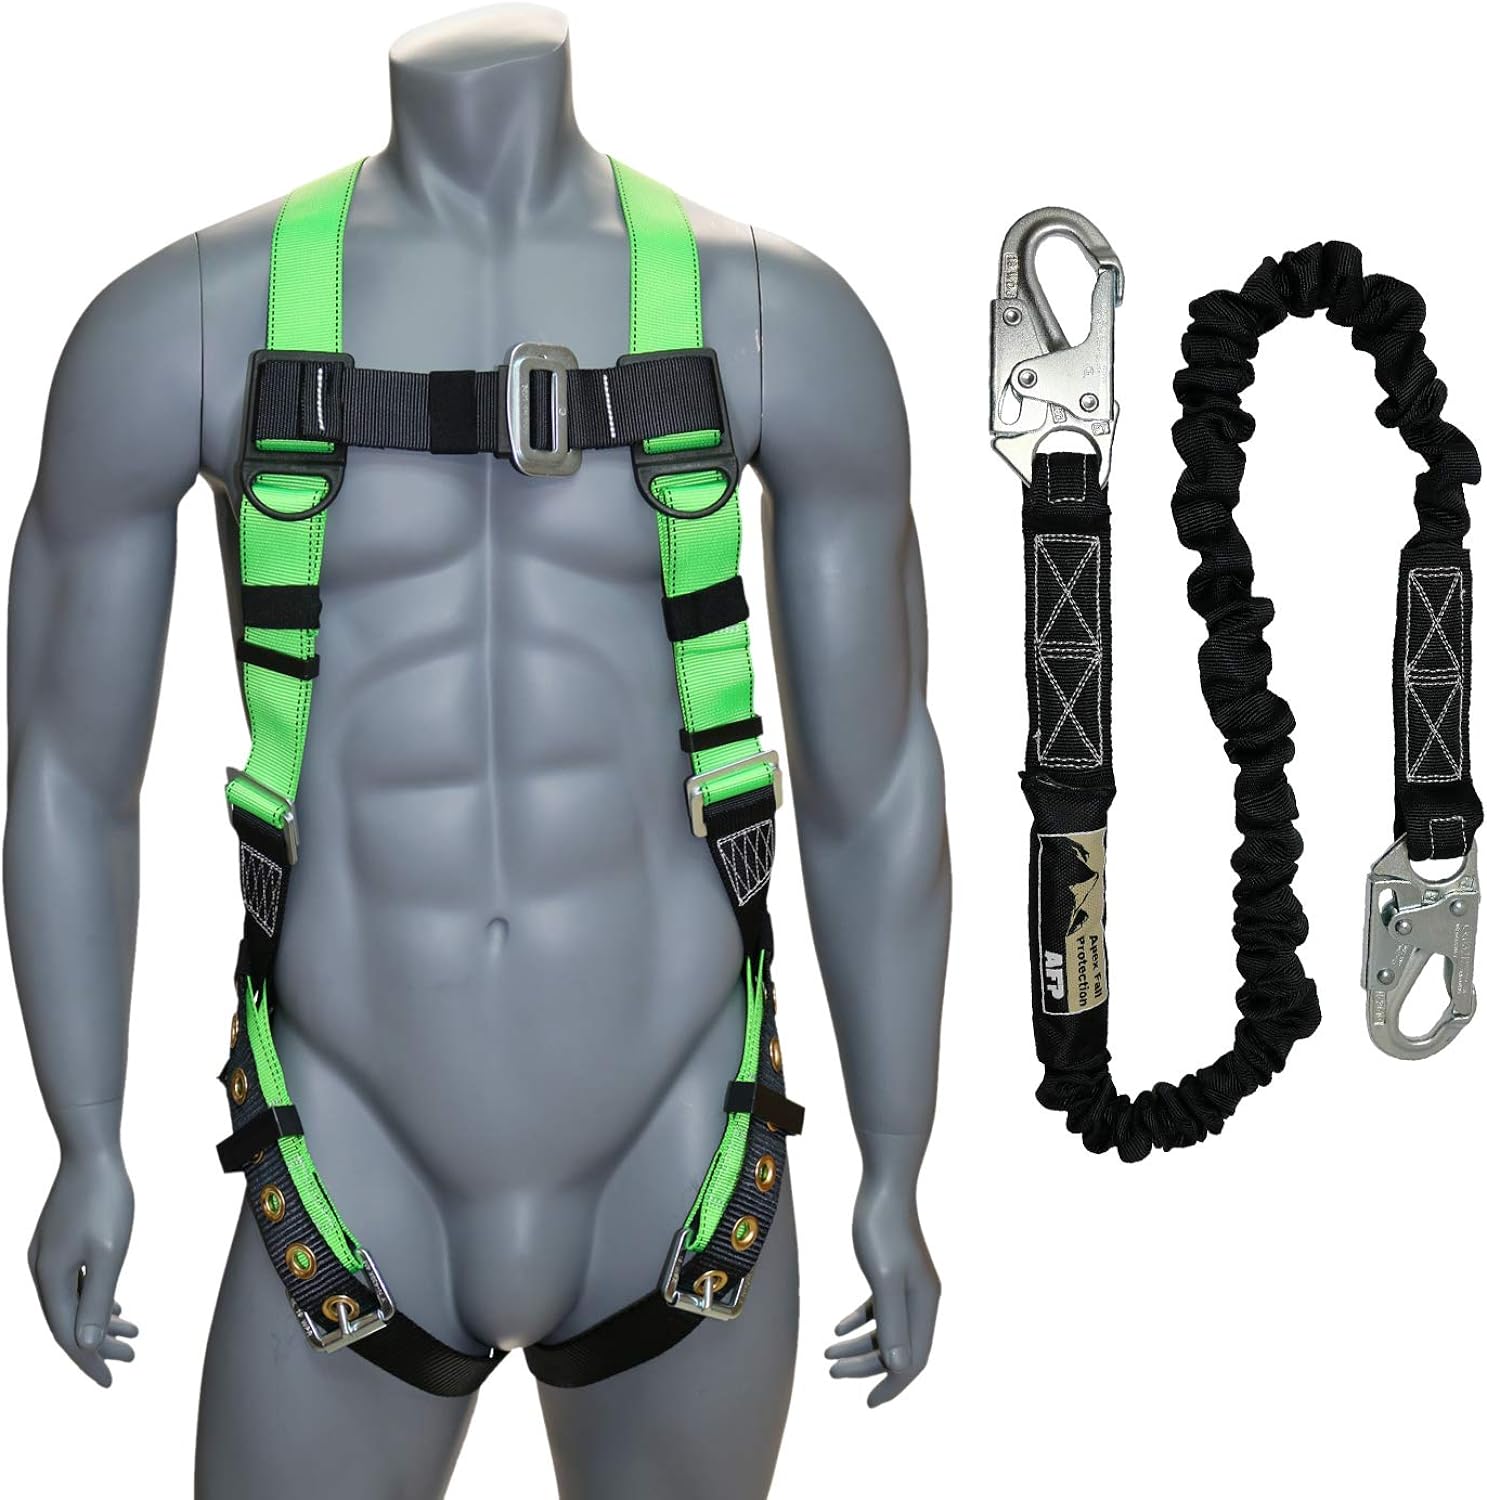 Top 5 Fall Arrest Safety Harnesses for Enhanced Workplace Safety